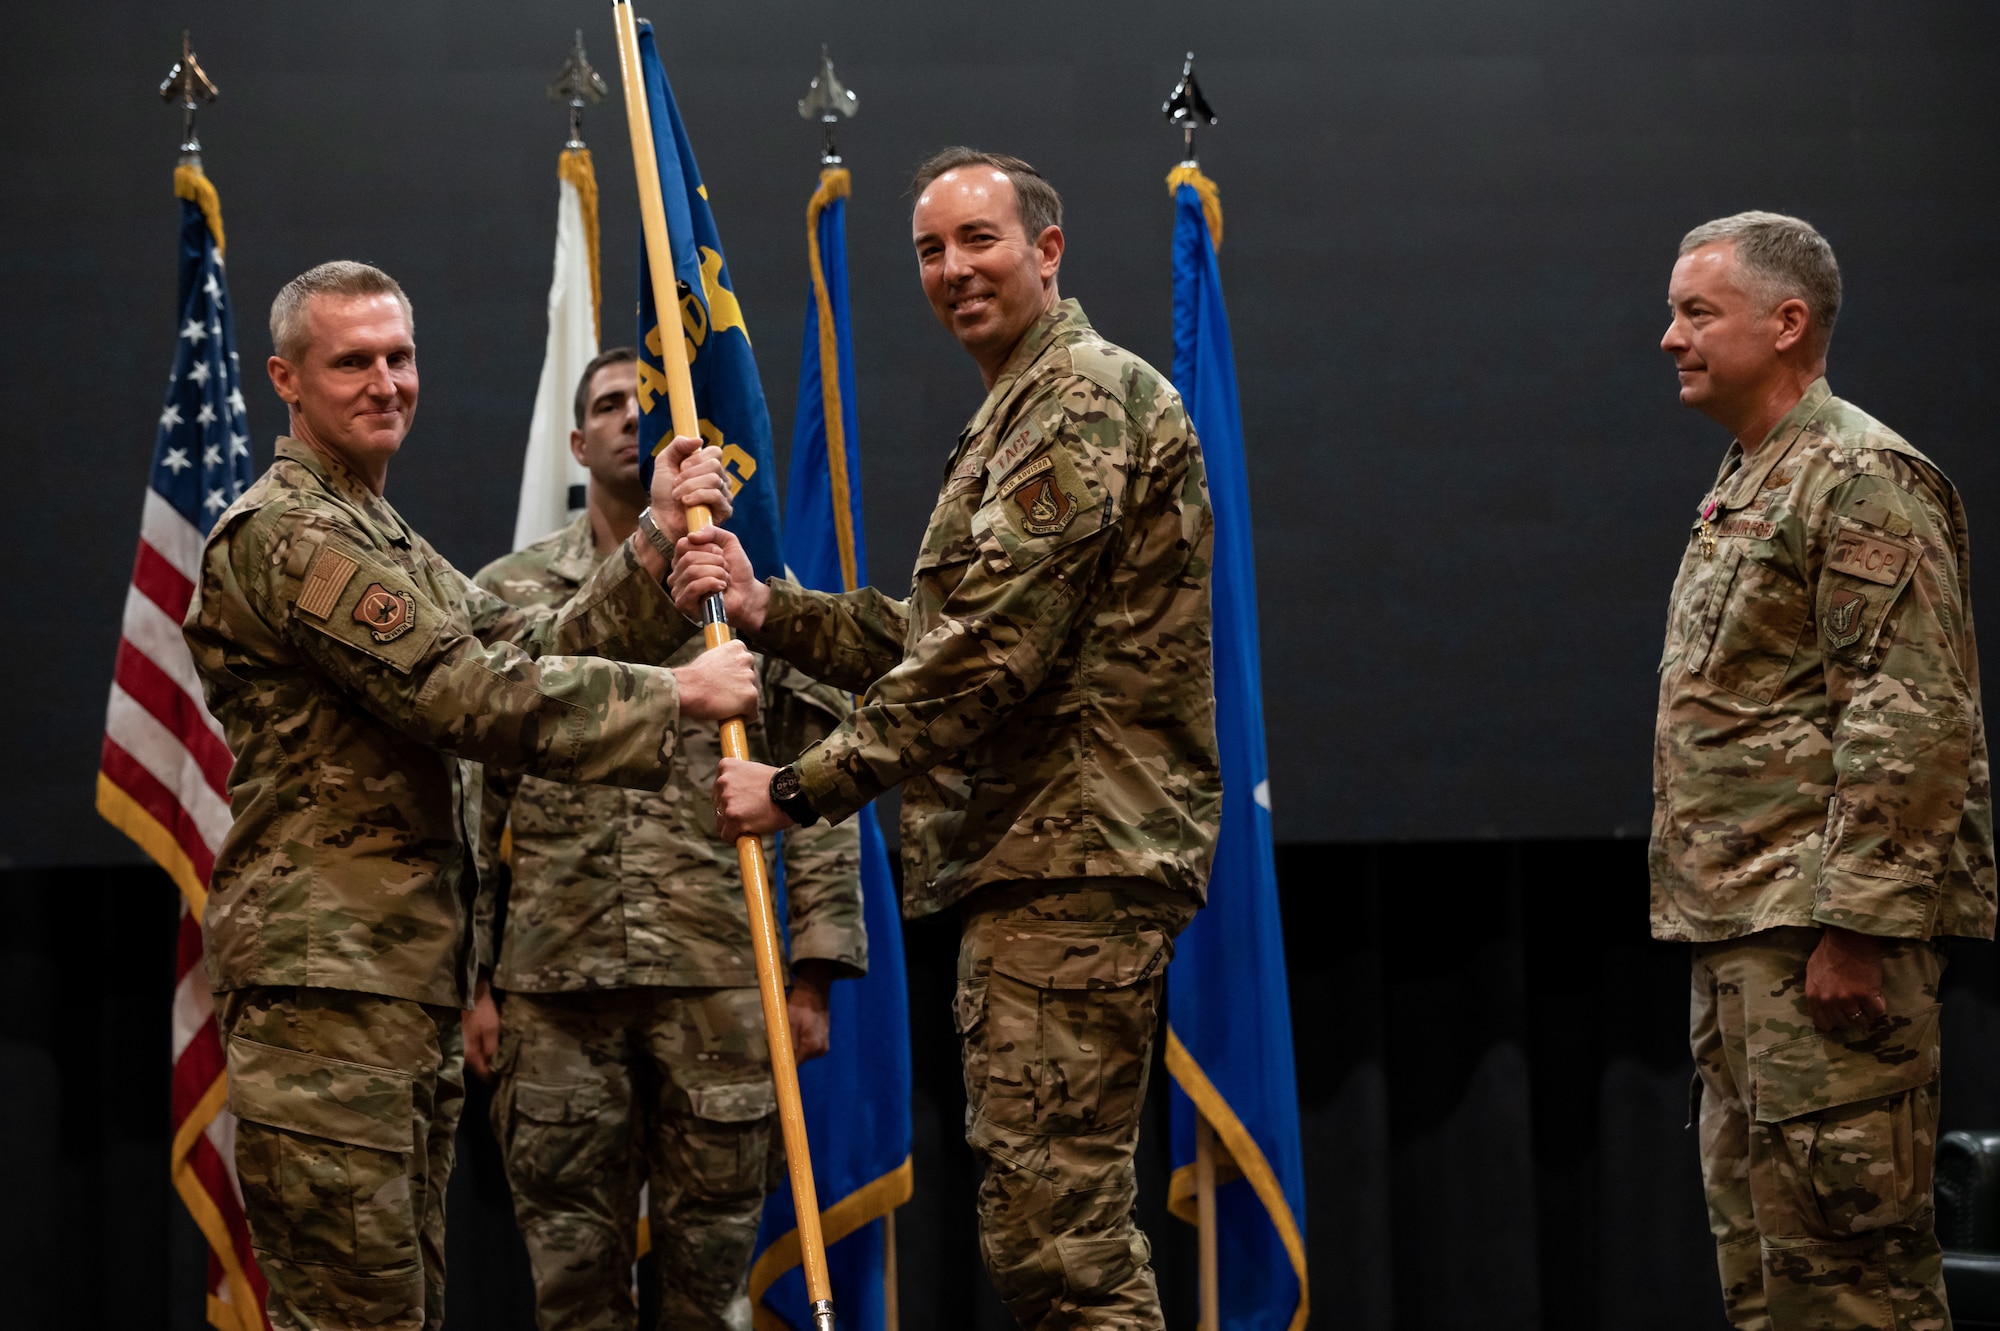 Brig. Gen. Jason Rueschhoff, 7th Air Force deputy commander, left, passes off the ceremonial guidon to Col. Scott Morgan, 607th Air Support Operations Group inbound commander, at Osan Air Base, Republic of Korea, June 22, 2021. This act marks the official beginning of Morgans command of the 607th ASOG. (U.S. Air Force photo by Tech. Sgt. Nicholas Alder)